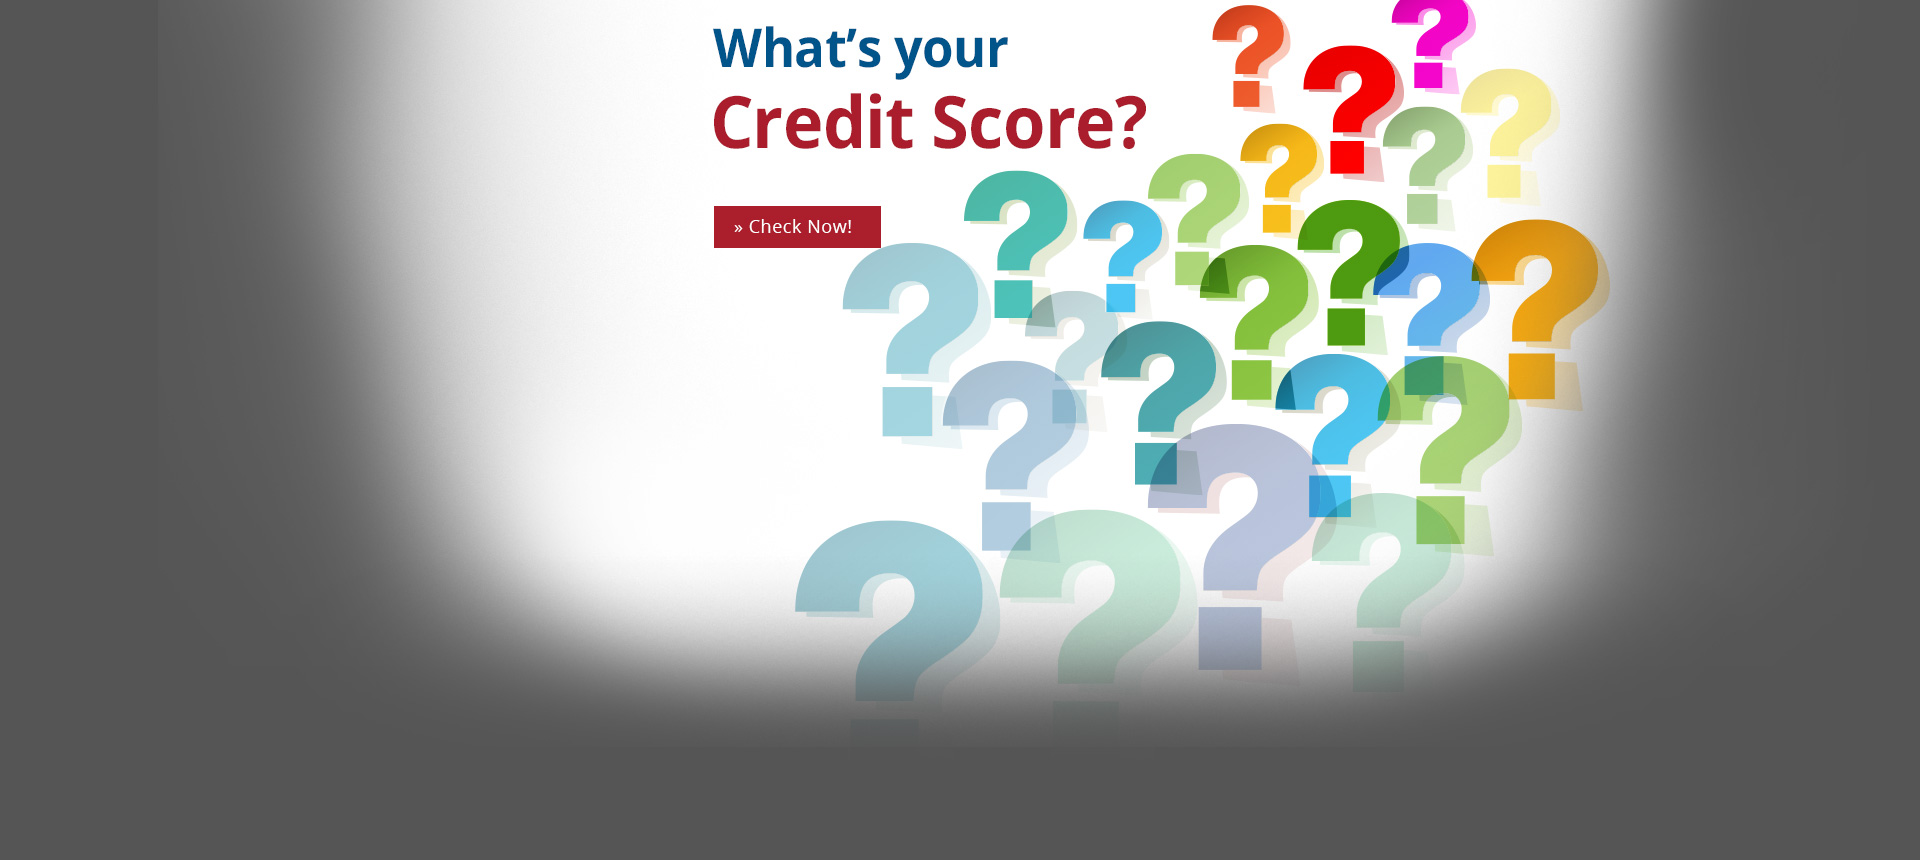 Check your Credit Score now!